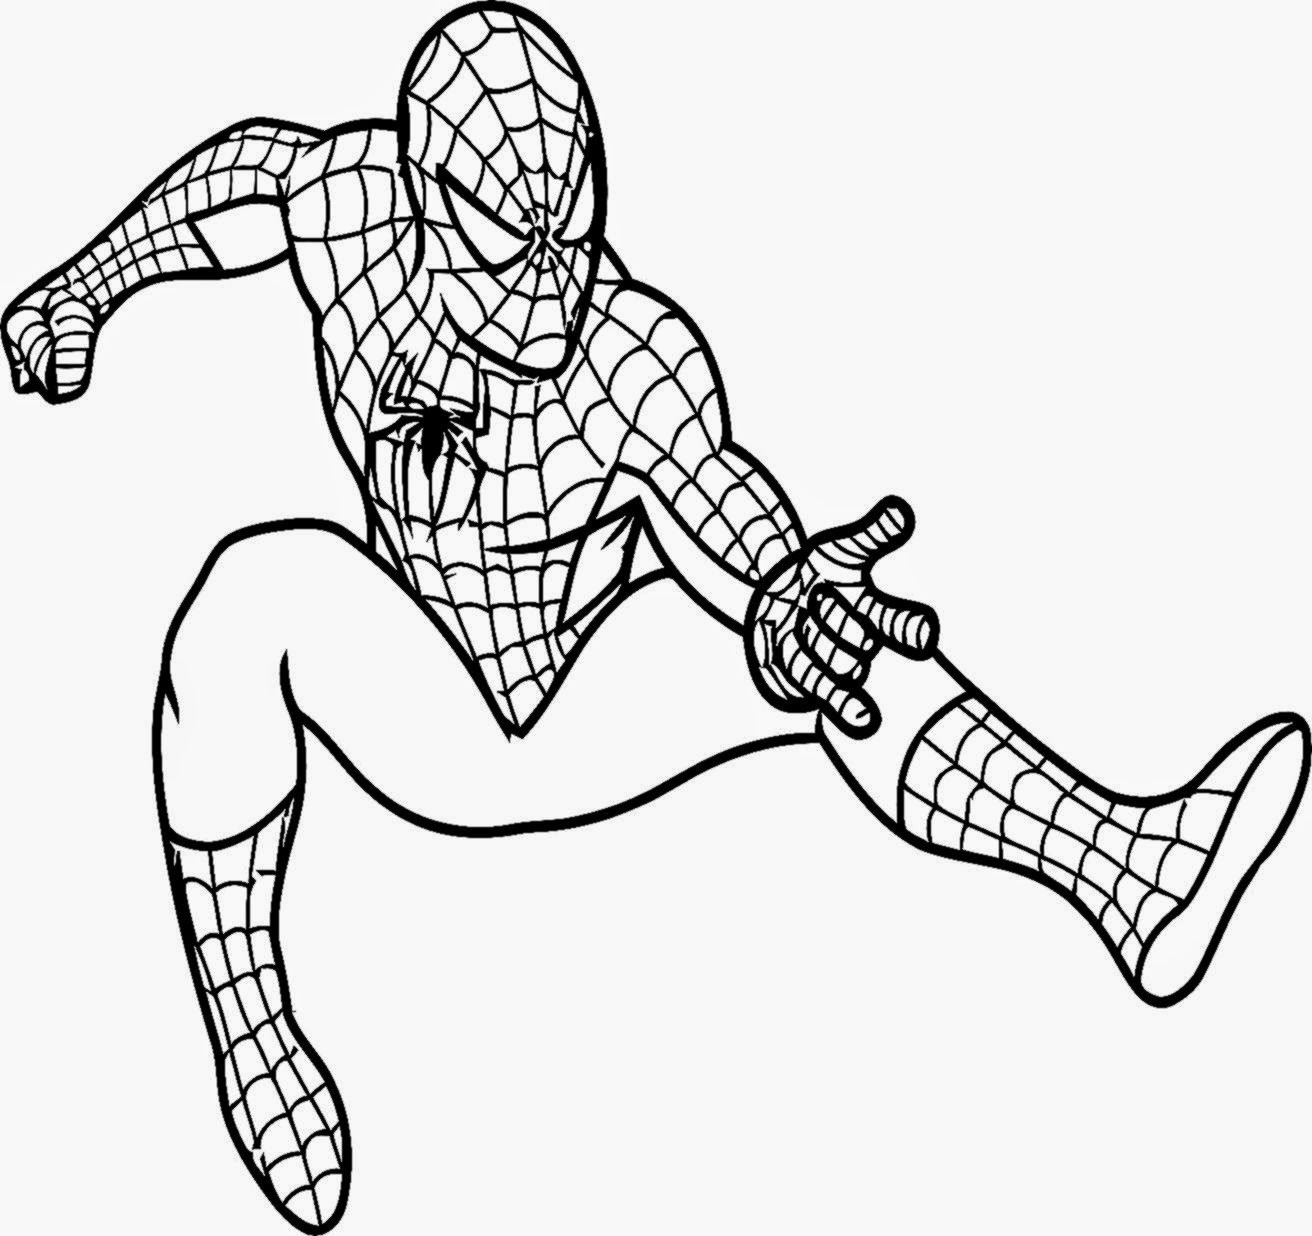 Coloring Pages For Kids Spiderman
 12 coloring pictures spiderman Print Color Craft